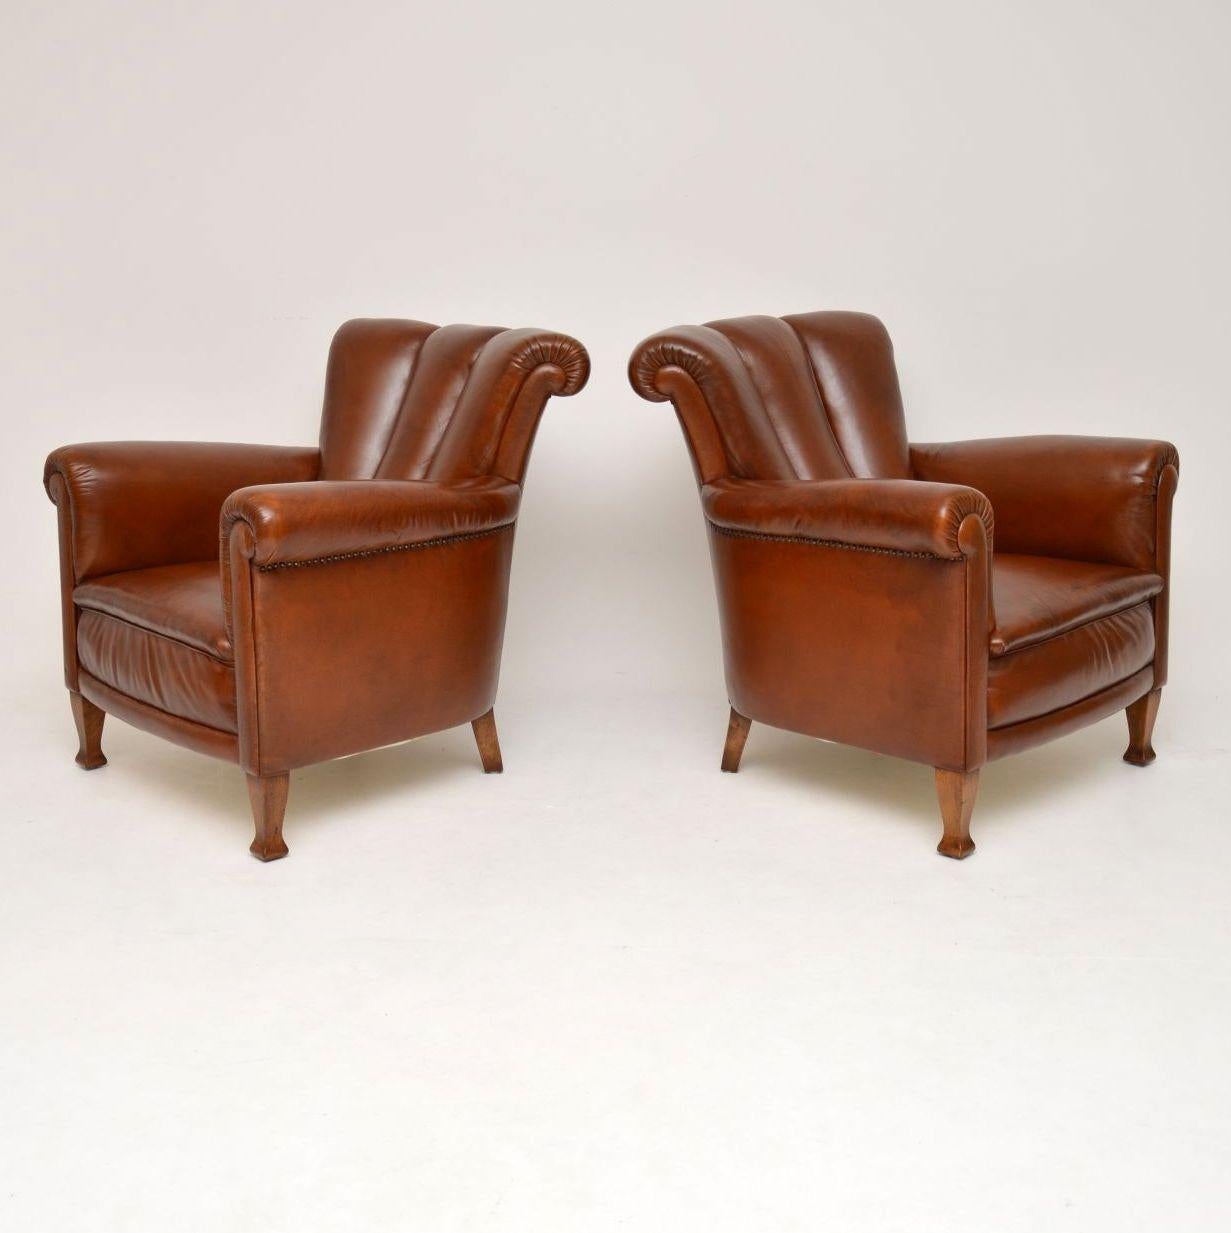 Edwardian Pair of Antique Swedish Leather Armchairs